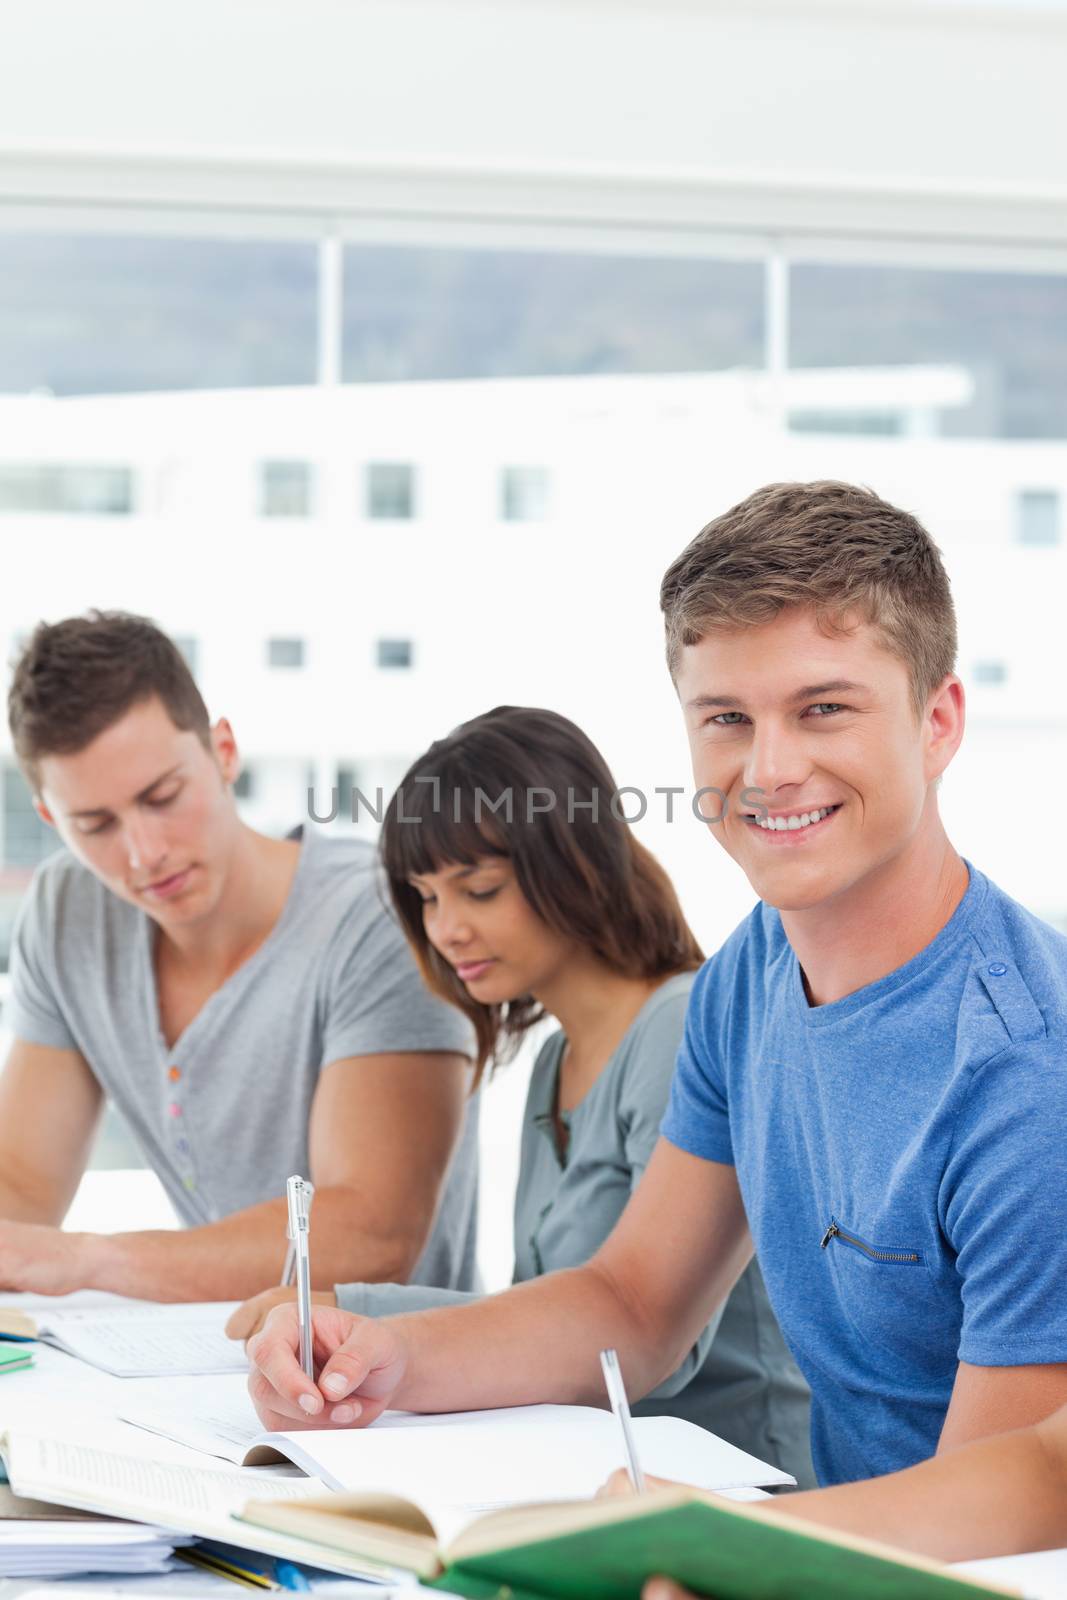 A smiling man looking into the camera while his friends work 